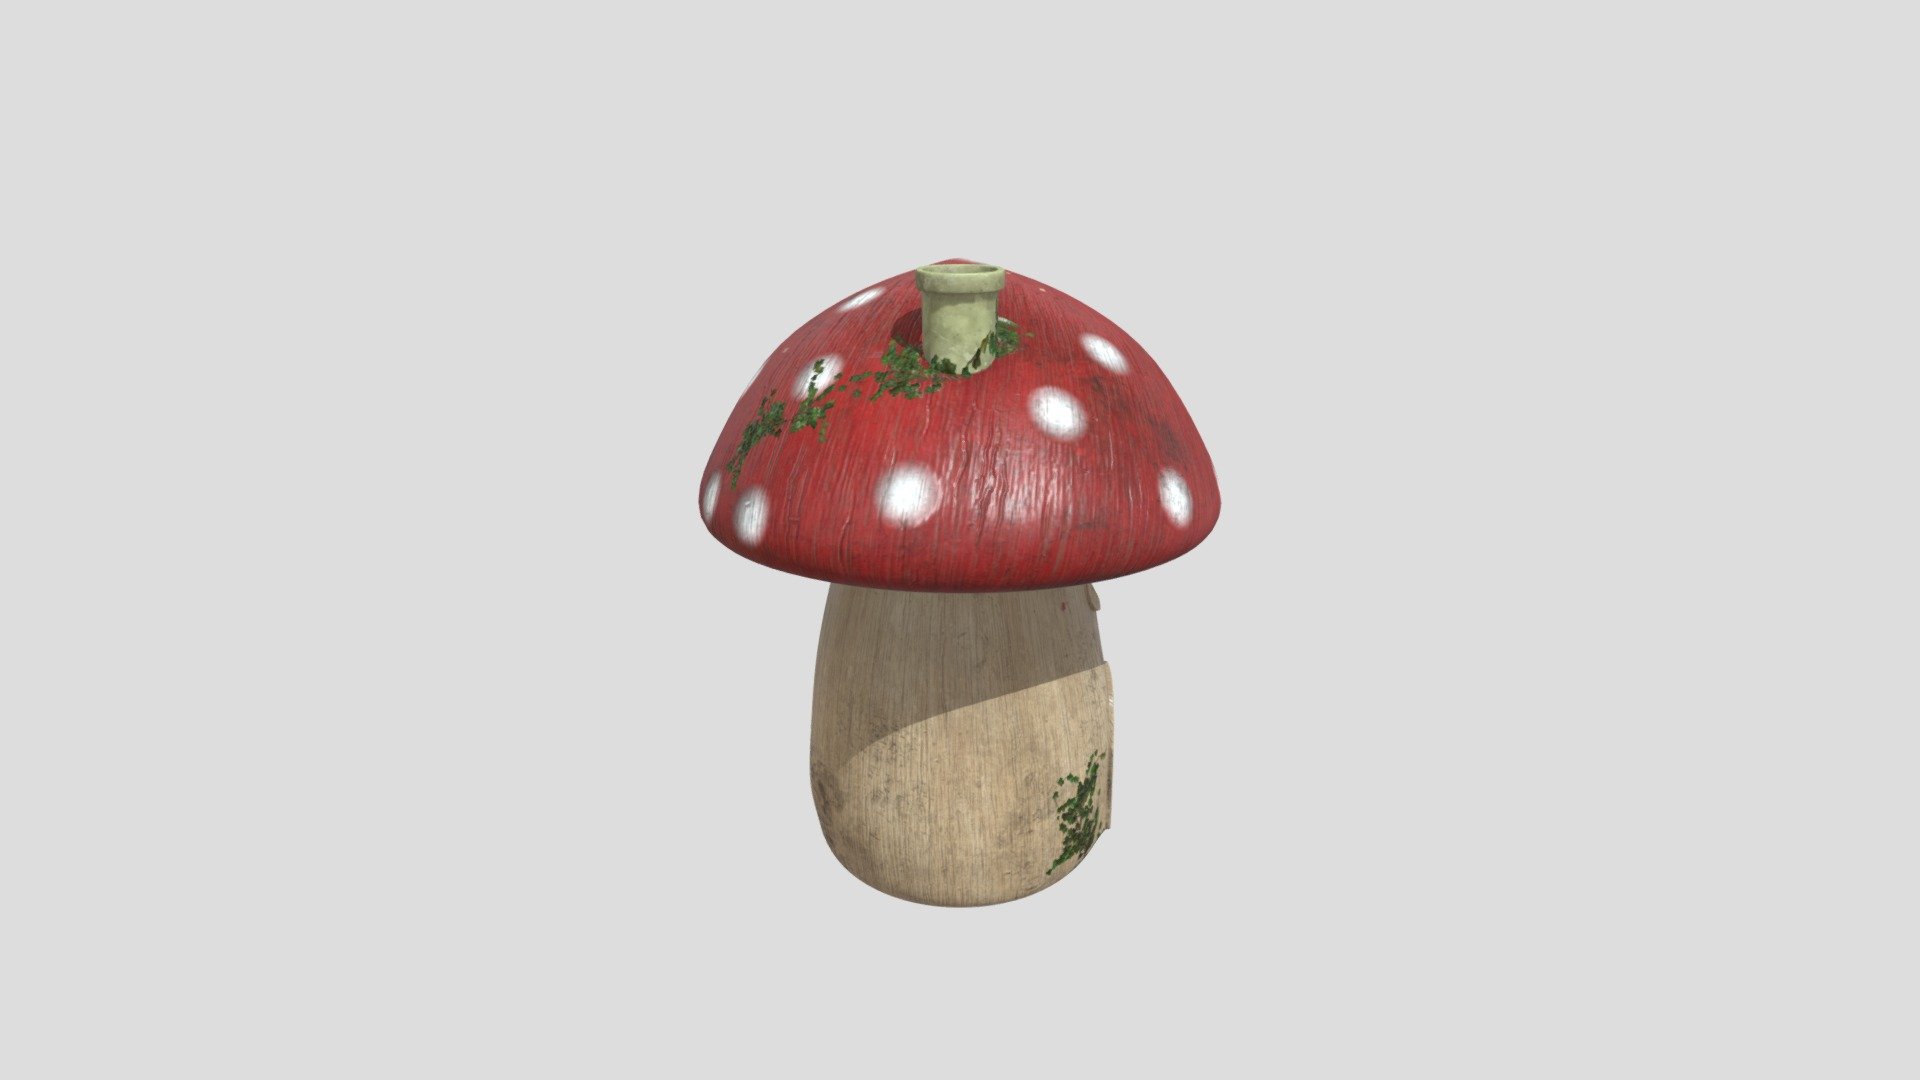 This is another asset for the environment that I created 3d model